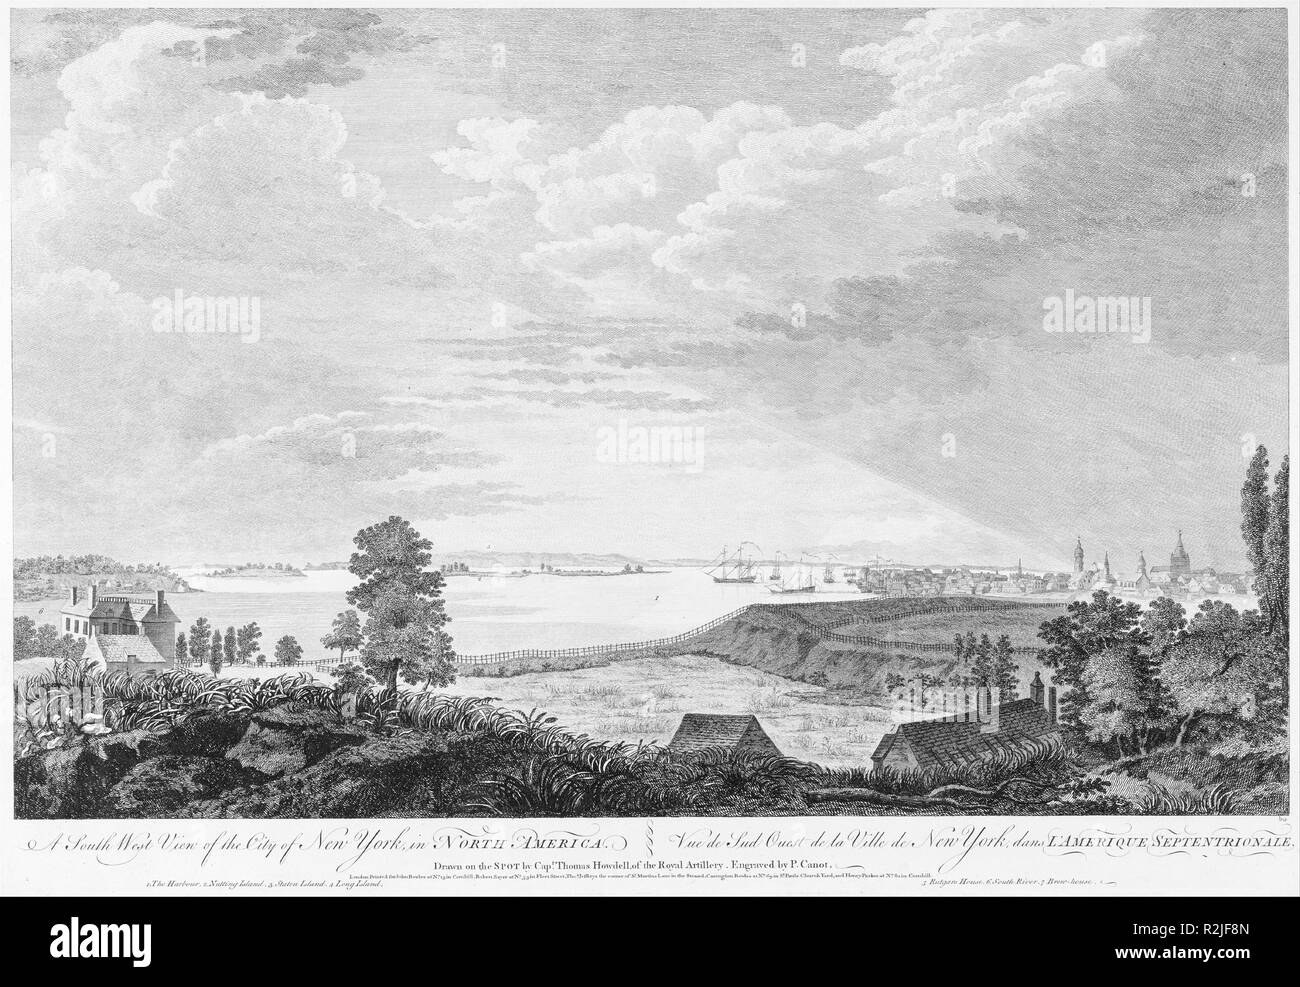 A South West View of the City of New York, in North America. Artist: Pierre Charles Canot (French, Paris 1710-1777 Kentish Town, London (active England)); After Captain Thomas Howdell, of the Royal Artillery (British, 18th century). Dimensions: plate: 14 1/8 x 20 1/2 in. (35.9 x 52.1 cm)  sheet: 17 11/16 x 24 3/16 in. (44.9 x 61.4 cm). Publisher: John Bowles (British, 1701?-1779) London; Robert Sayer (British, Sunderland 1725-1794 Bath); Thomas Jeffreys (London). Date: ca. 1768.  Published in London in 1768, this prospect of New York was made when the city was under British control. Pierre Can Stock Photo